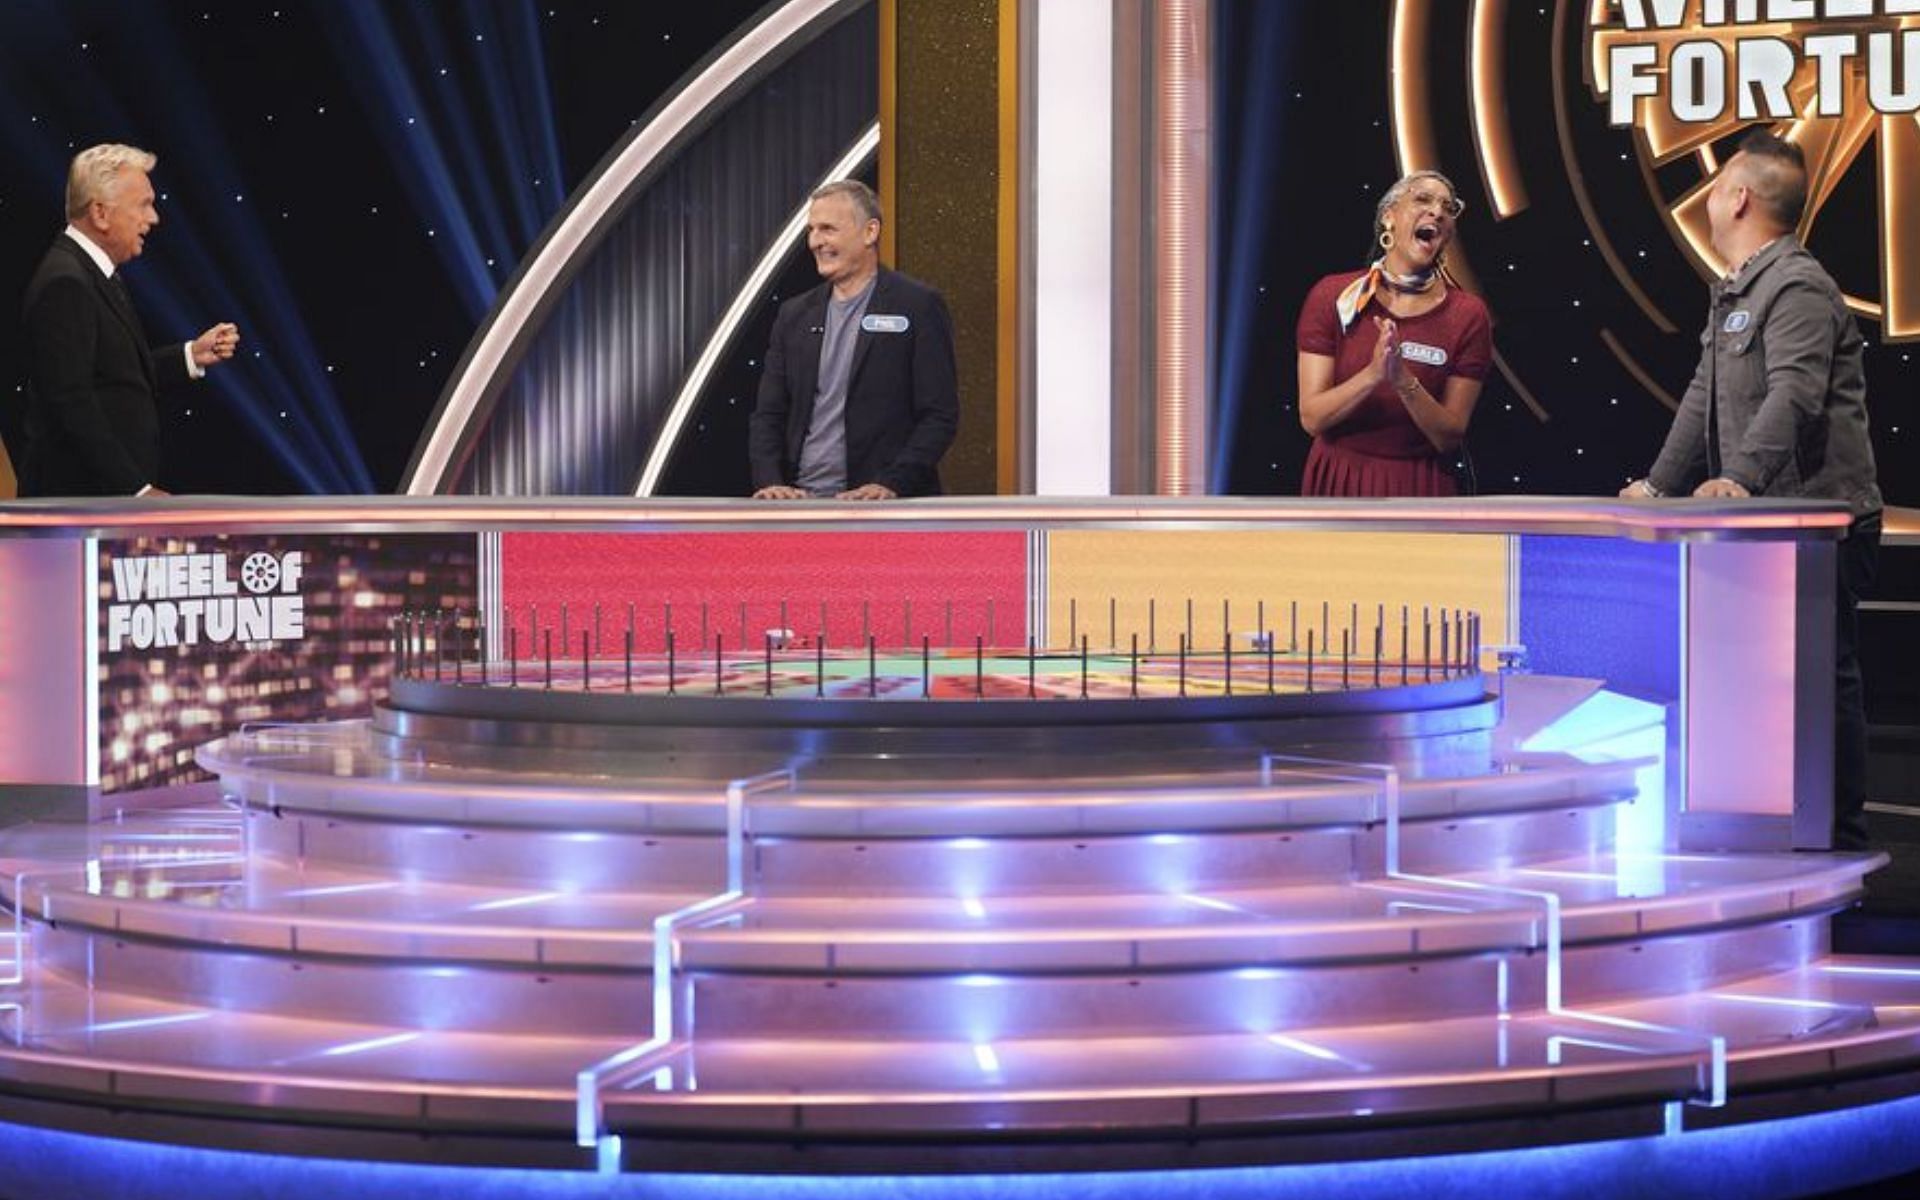 3 famous personalities battle it out to win $1 Million (Image via Christopher Willard/ ABC)